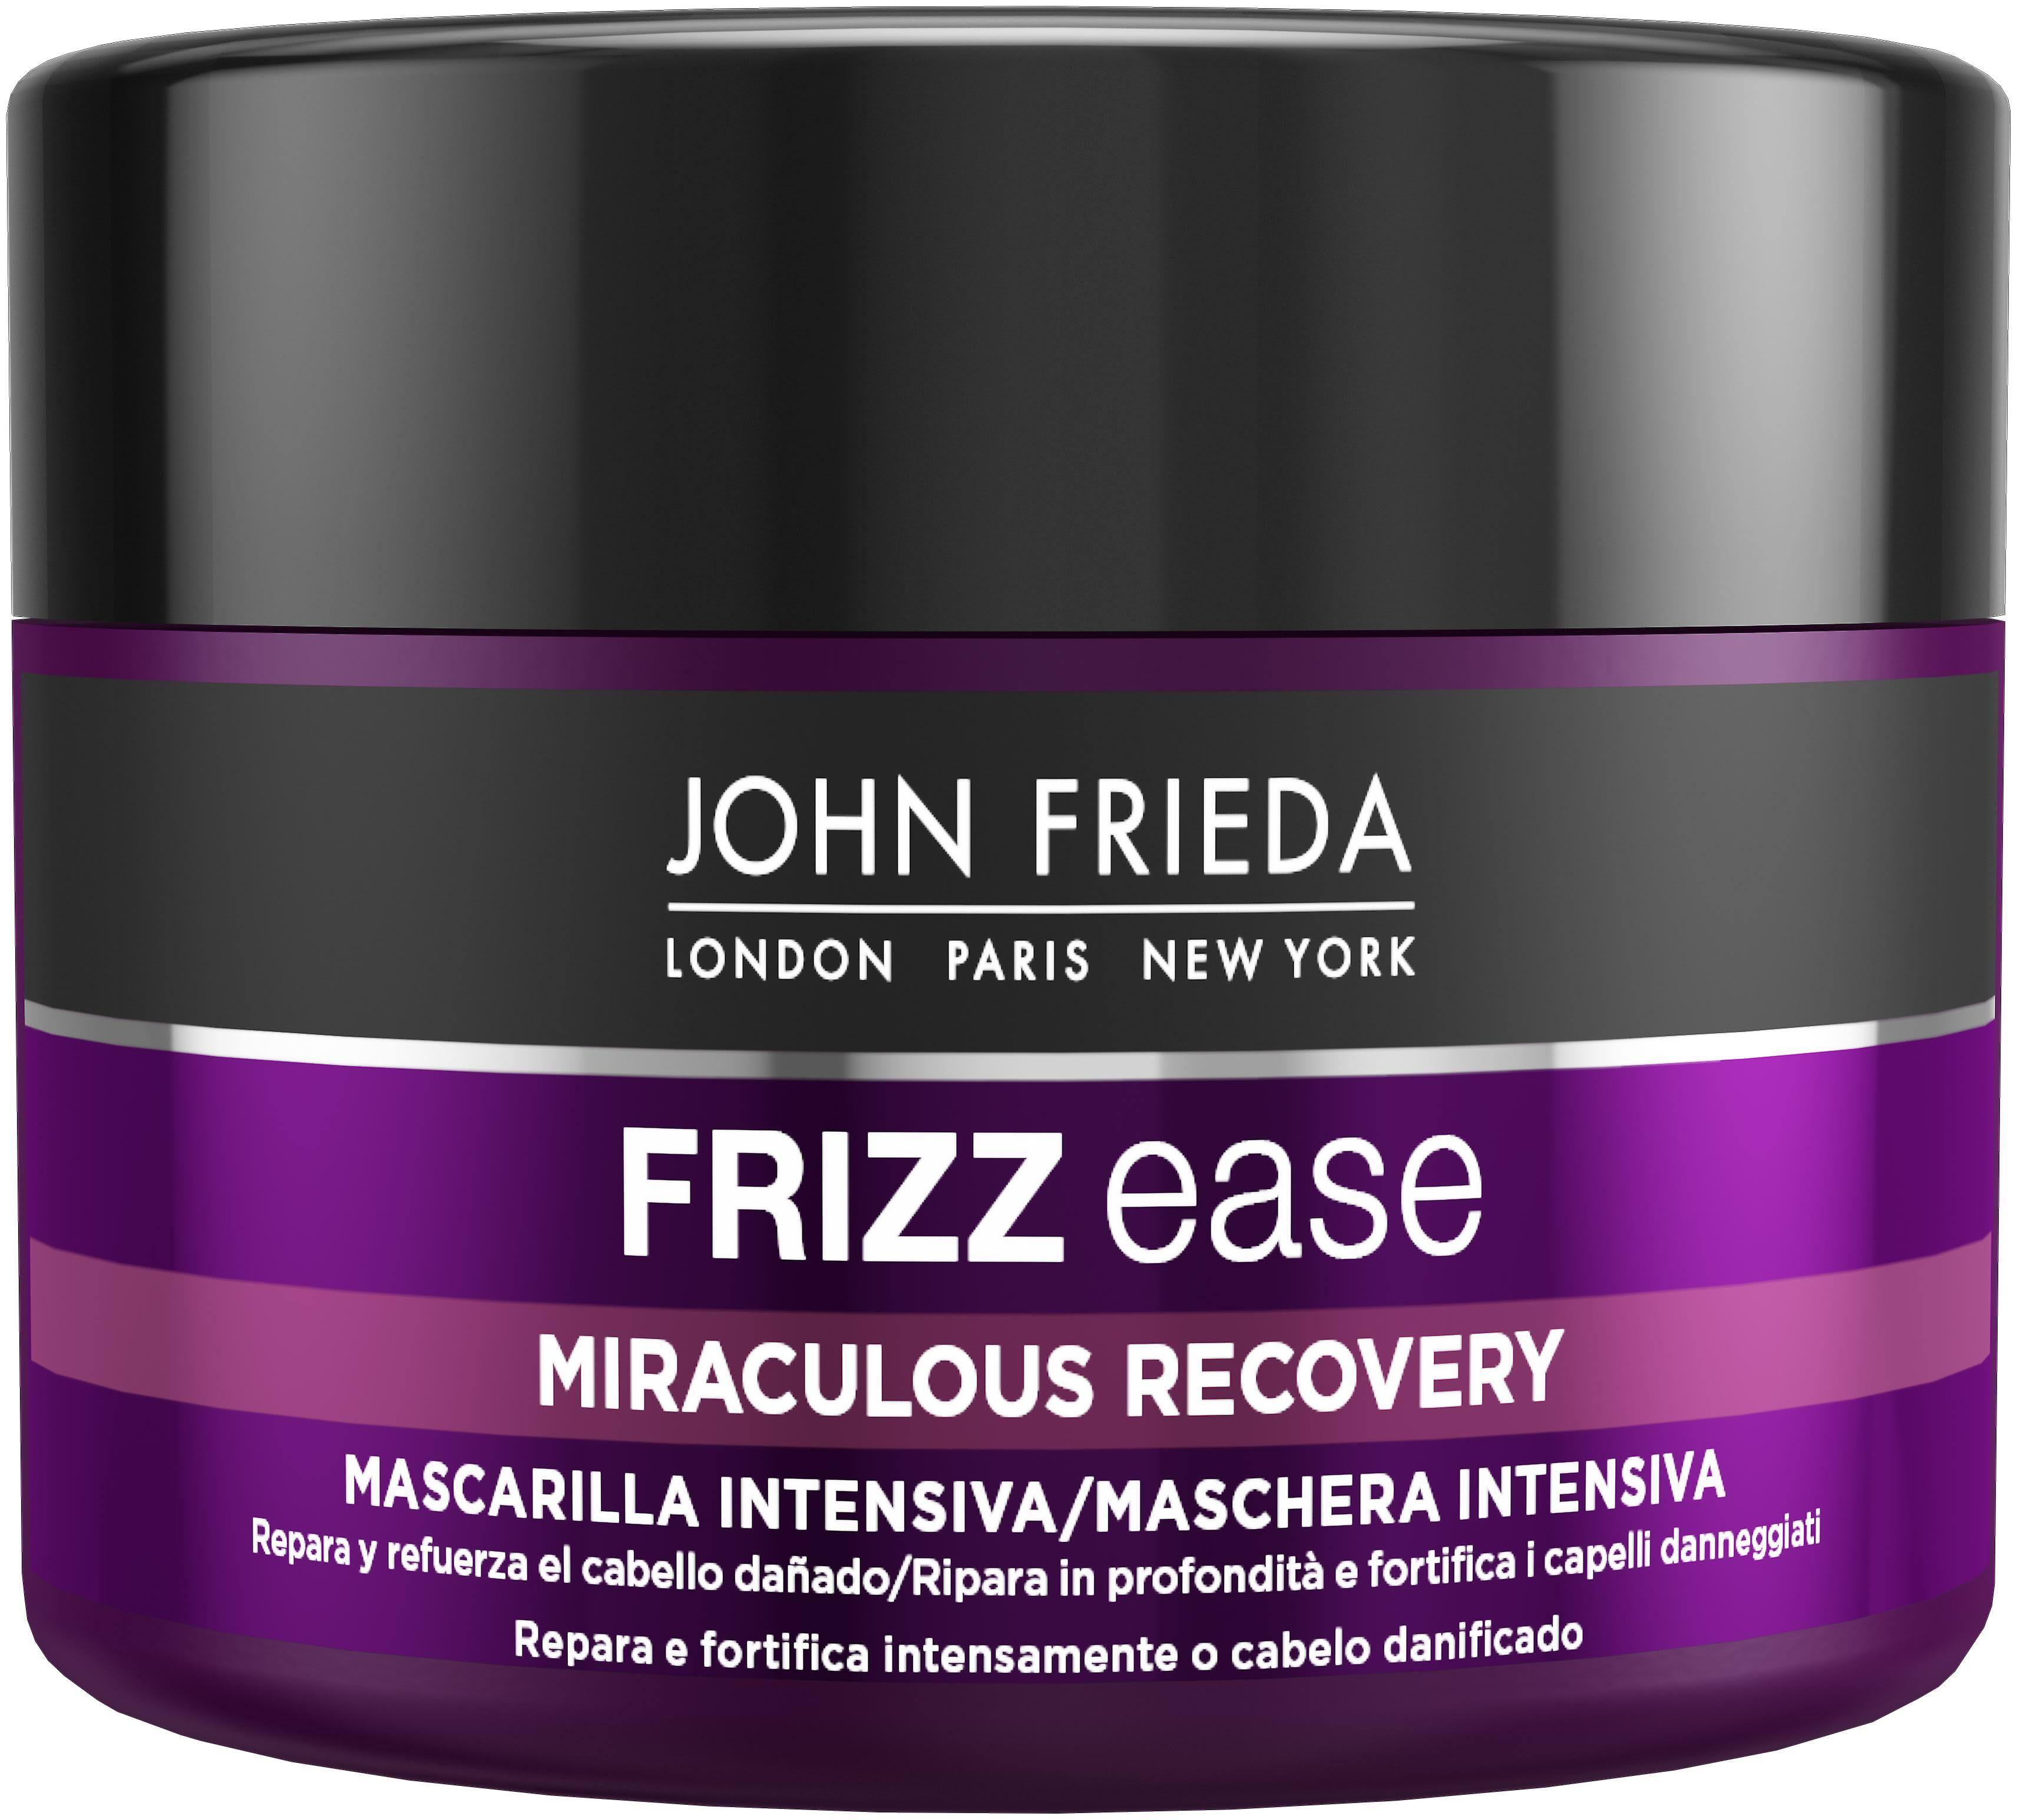 John Frieda Frizz Ease Miraculous Recovery Deep Conditioner (250 ml)